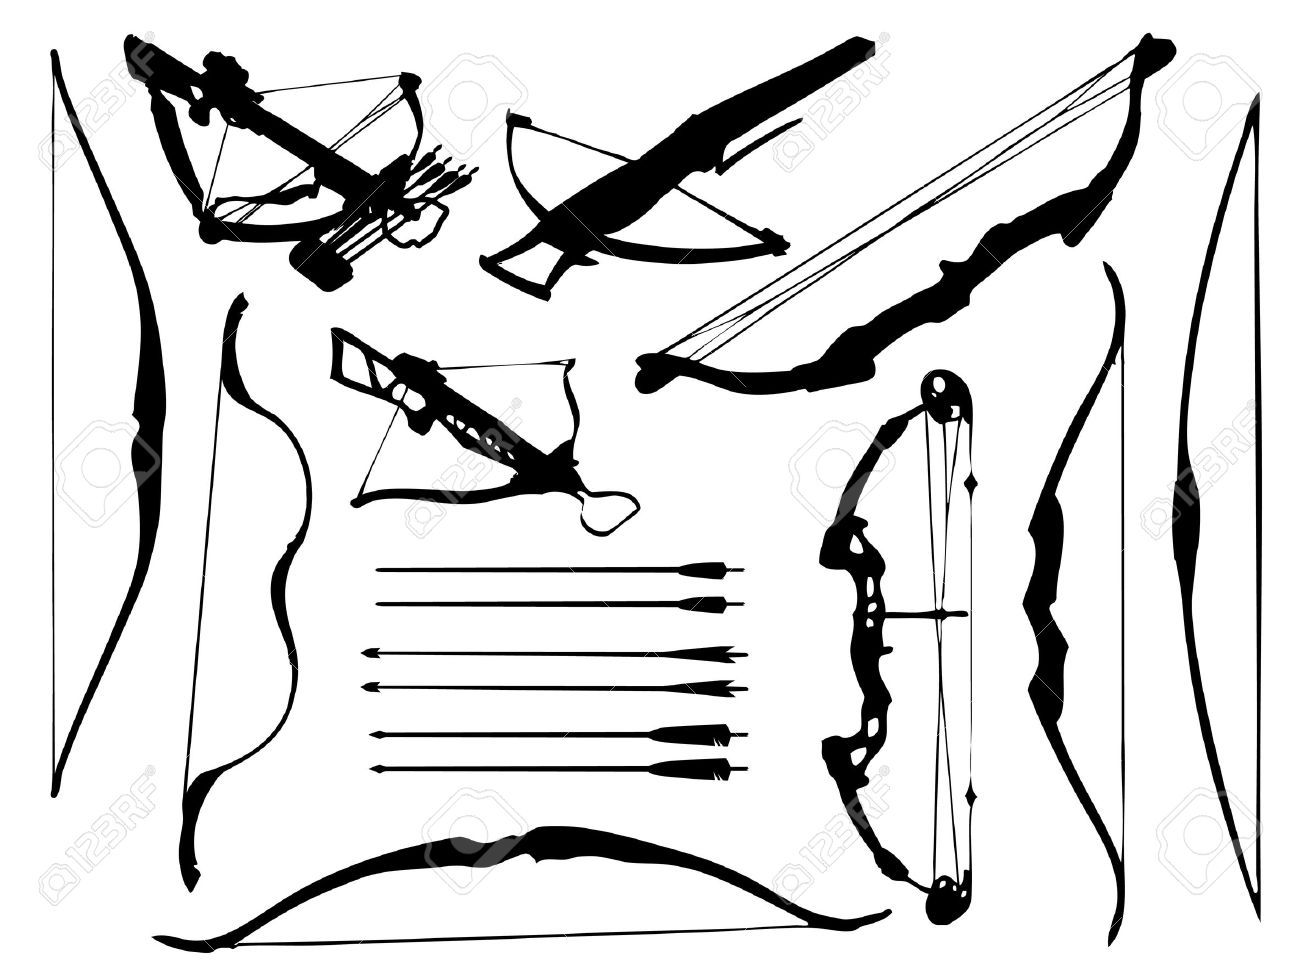 Crossbow clipart #2, Download drawings